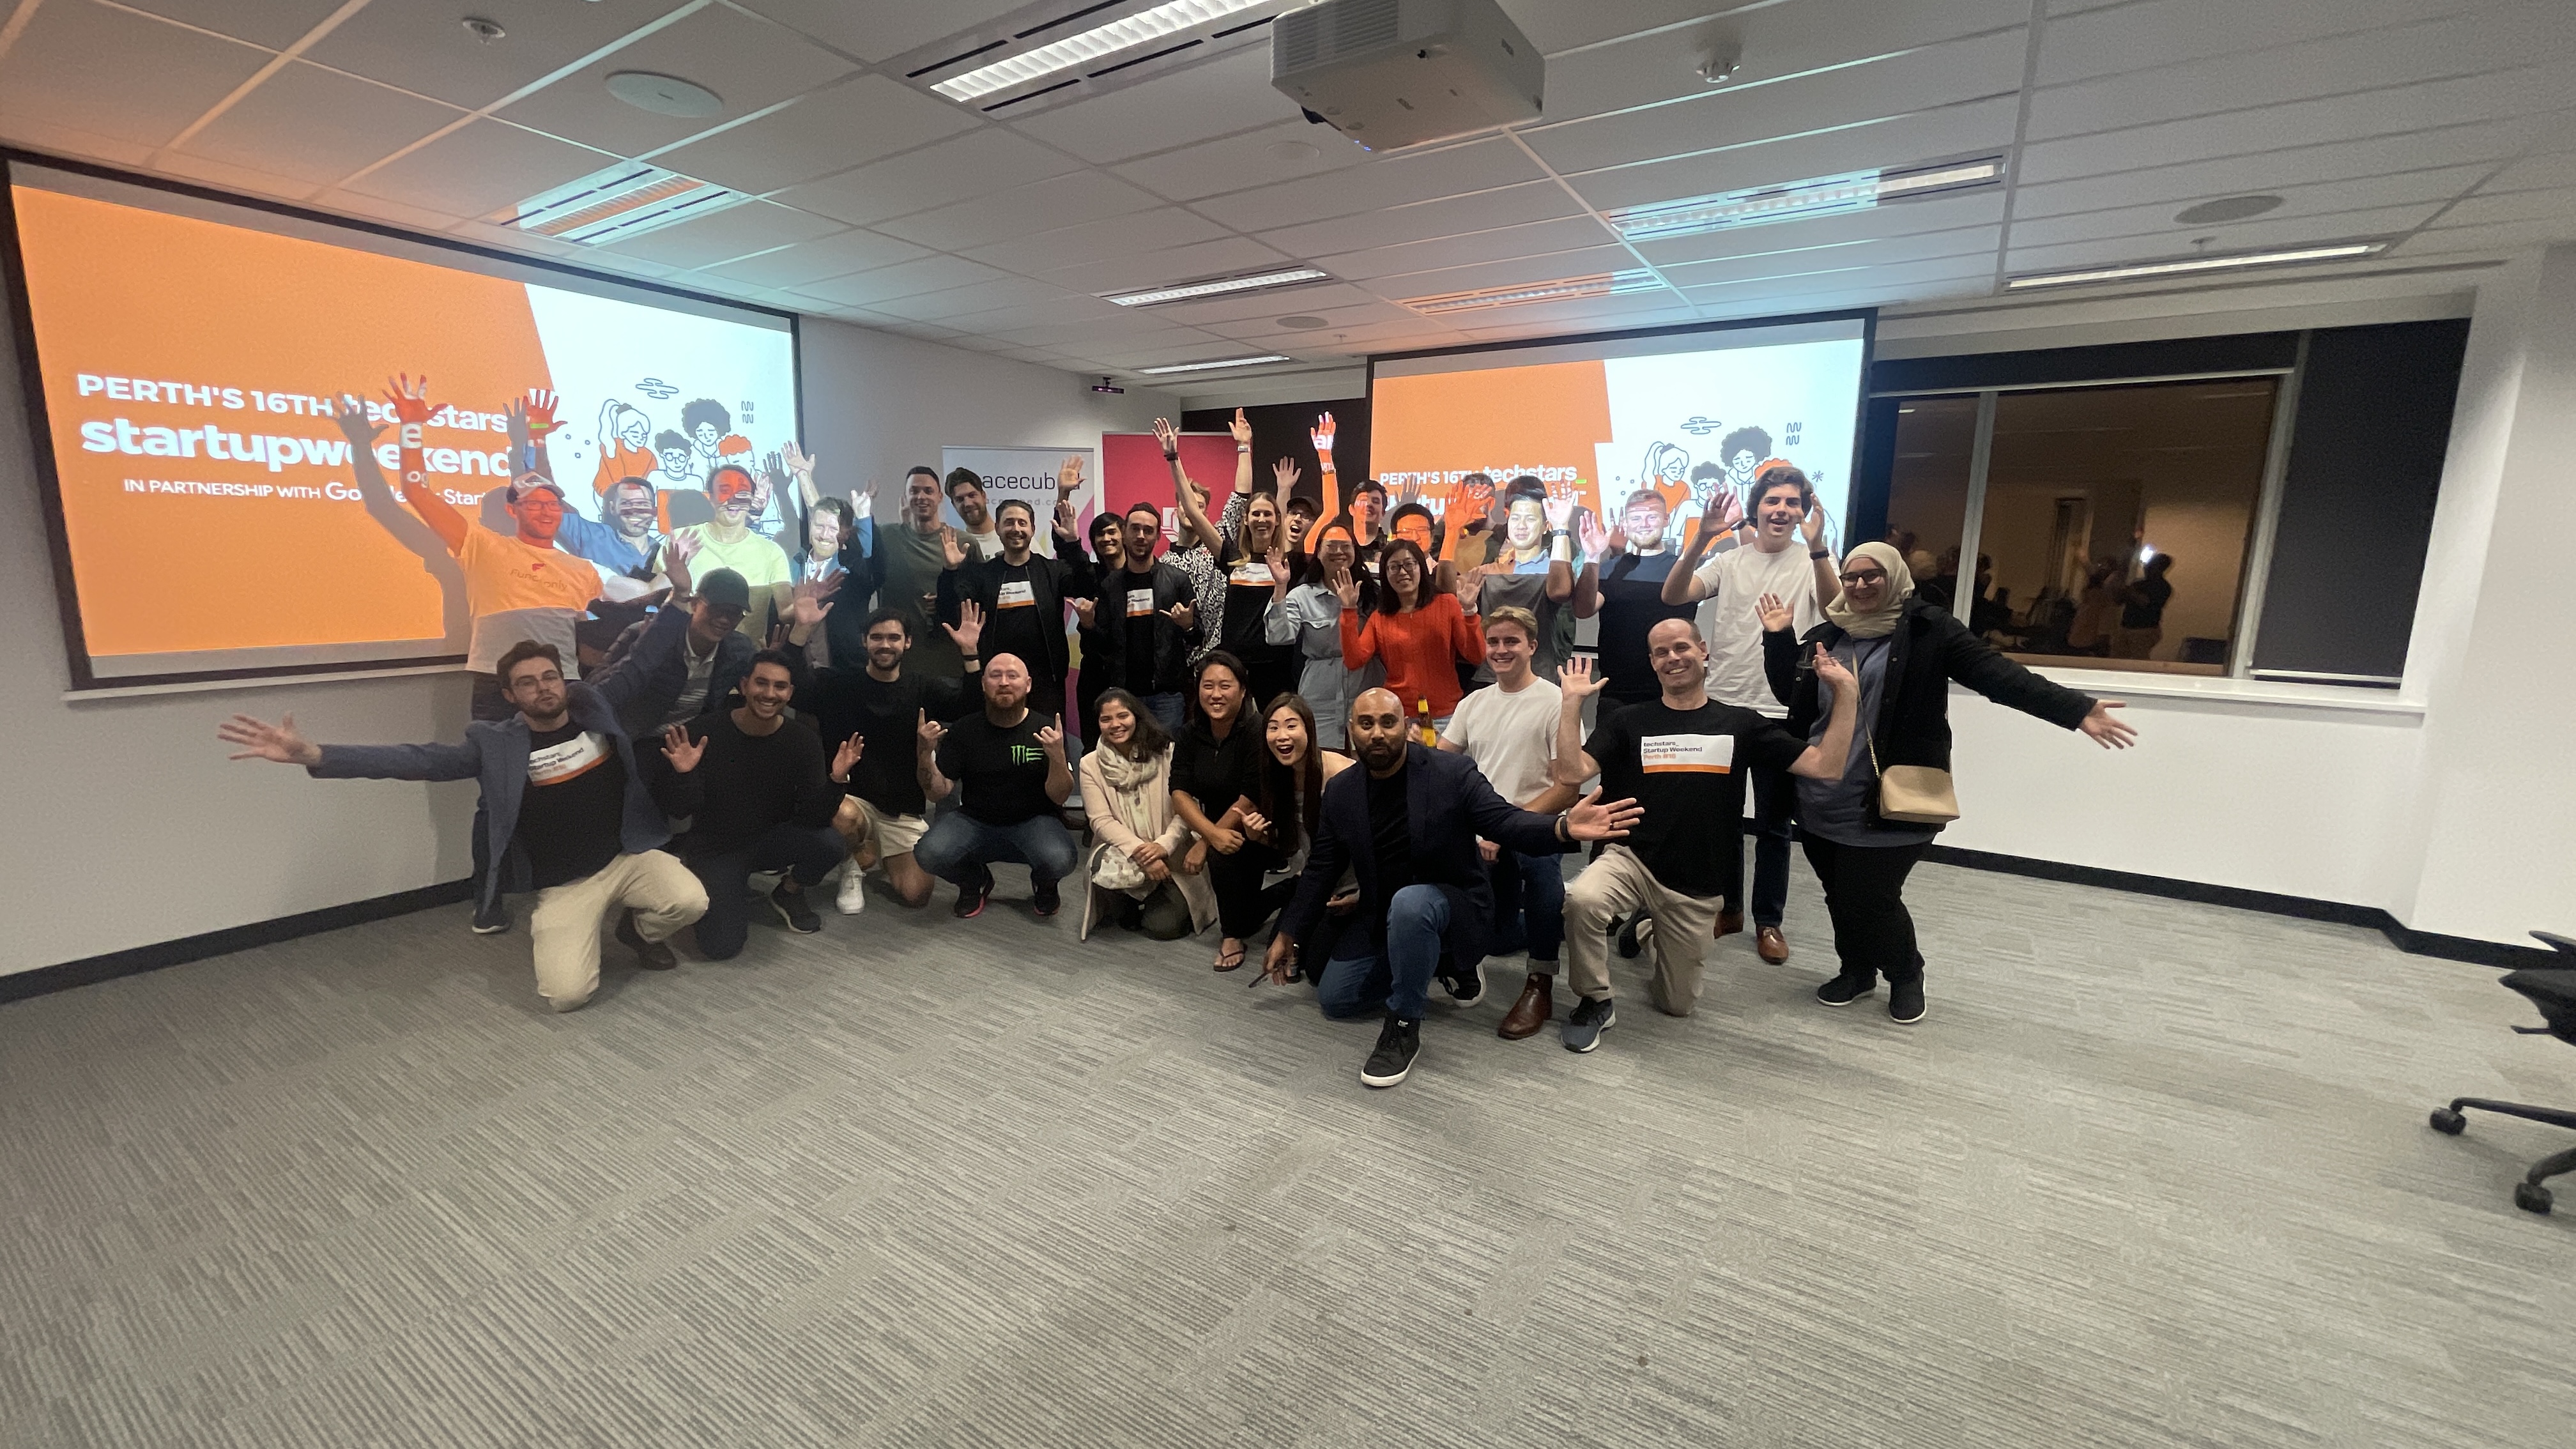 That’s a wrap on another sold-out Startup Weekend in Perth!